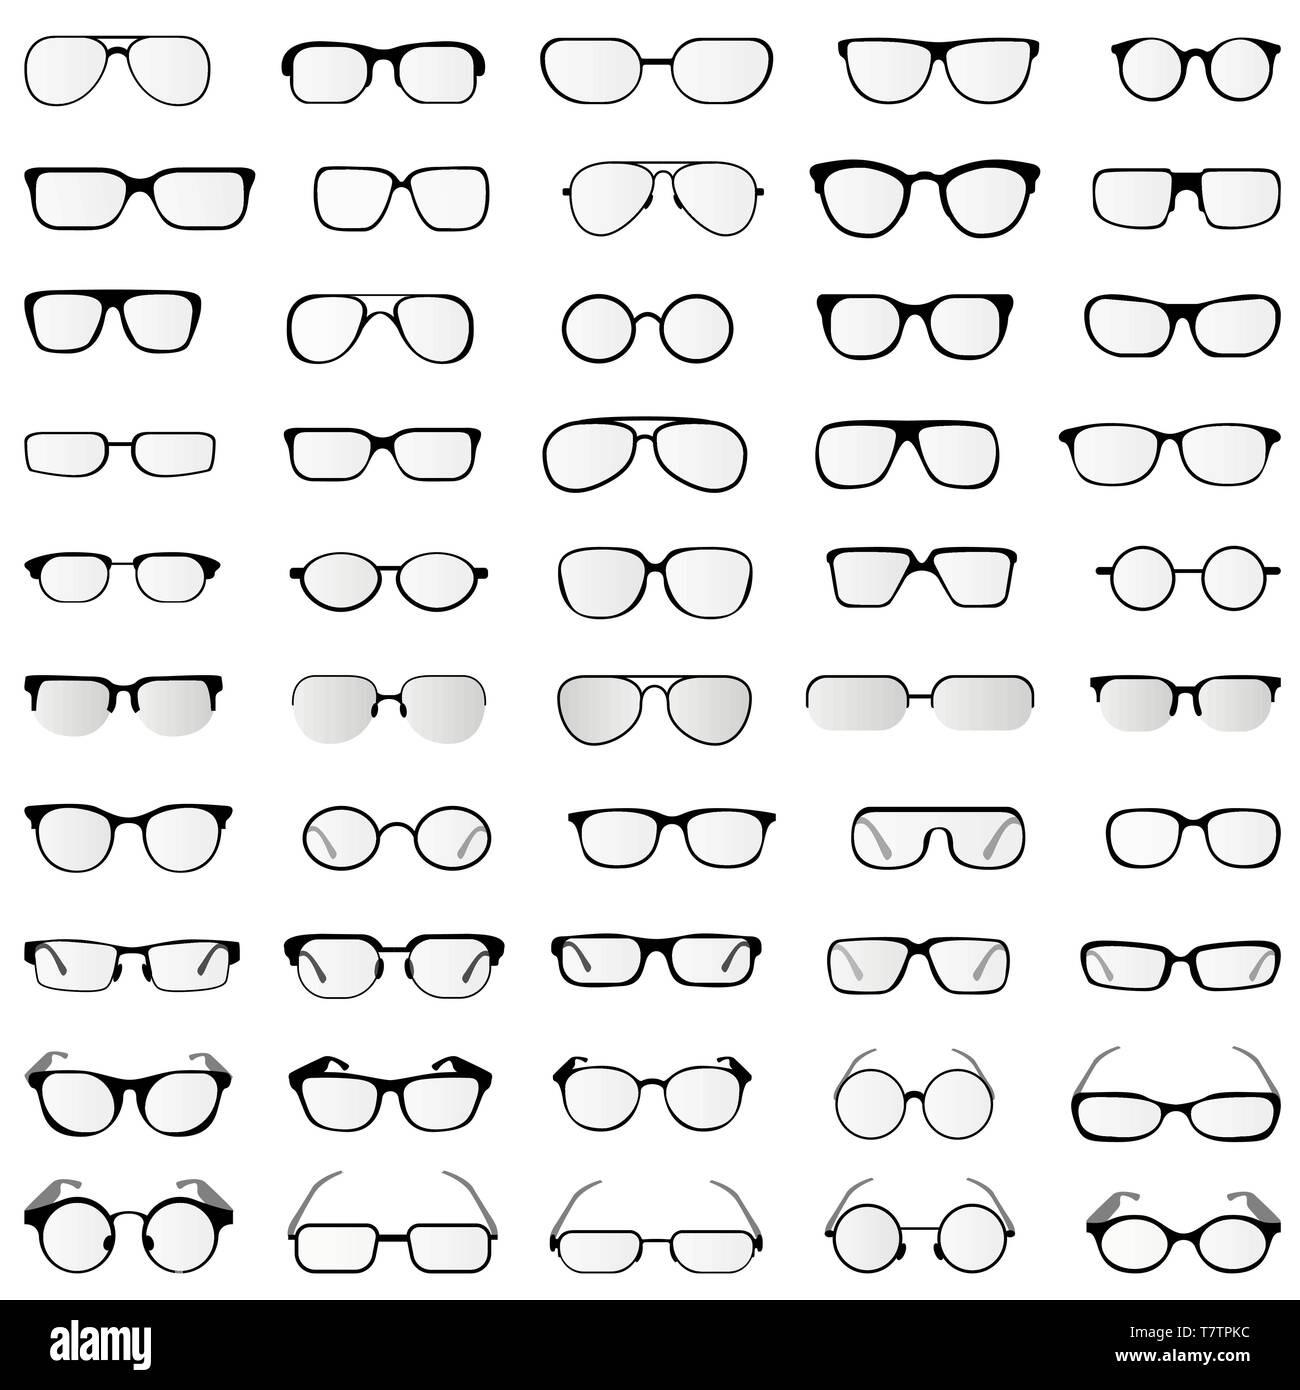 vector collection of glasses and sunglasses in different styles and forms Stock Vector